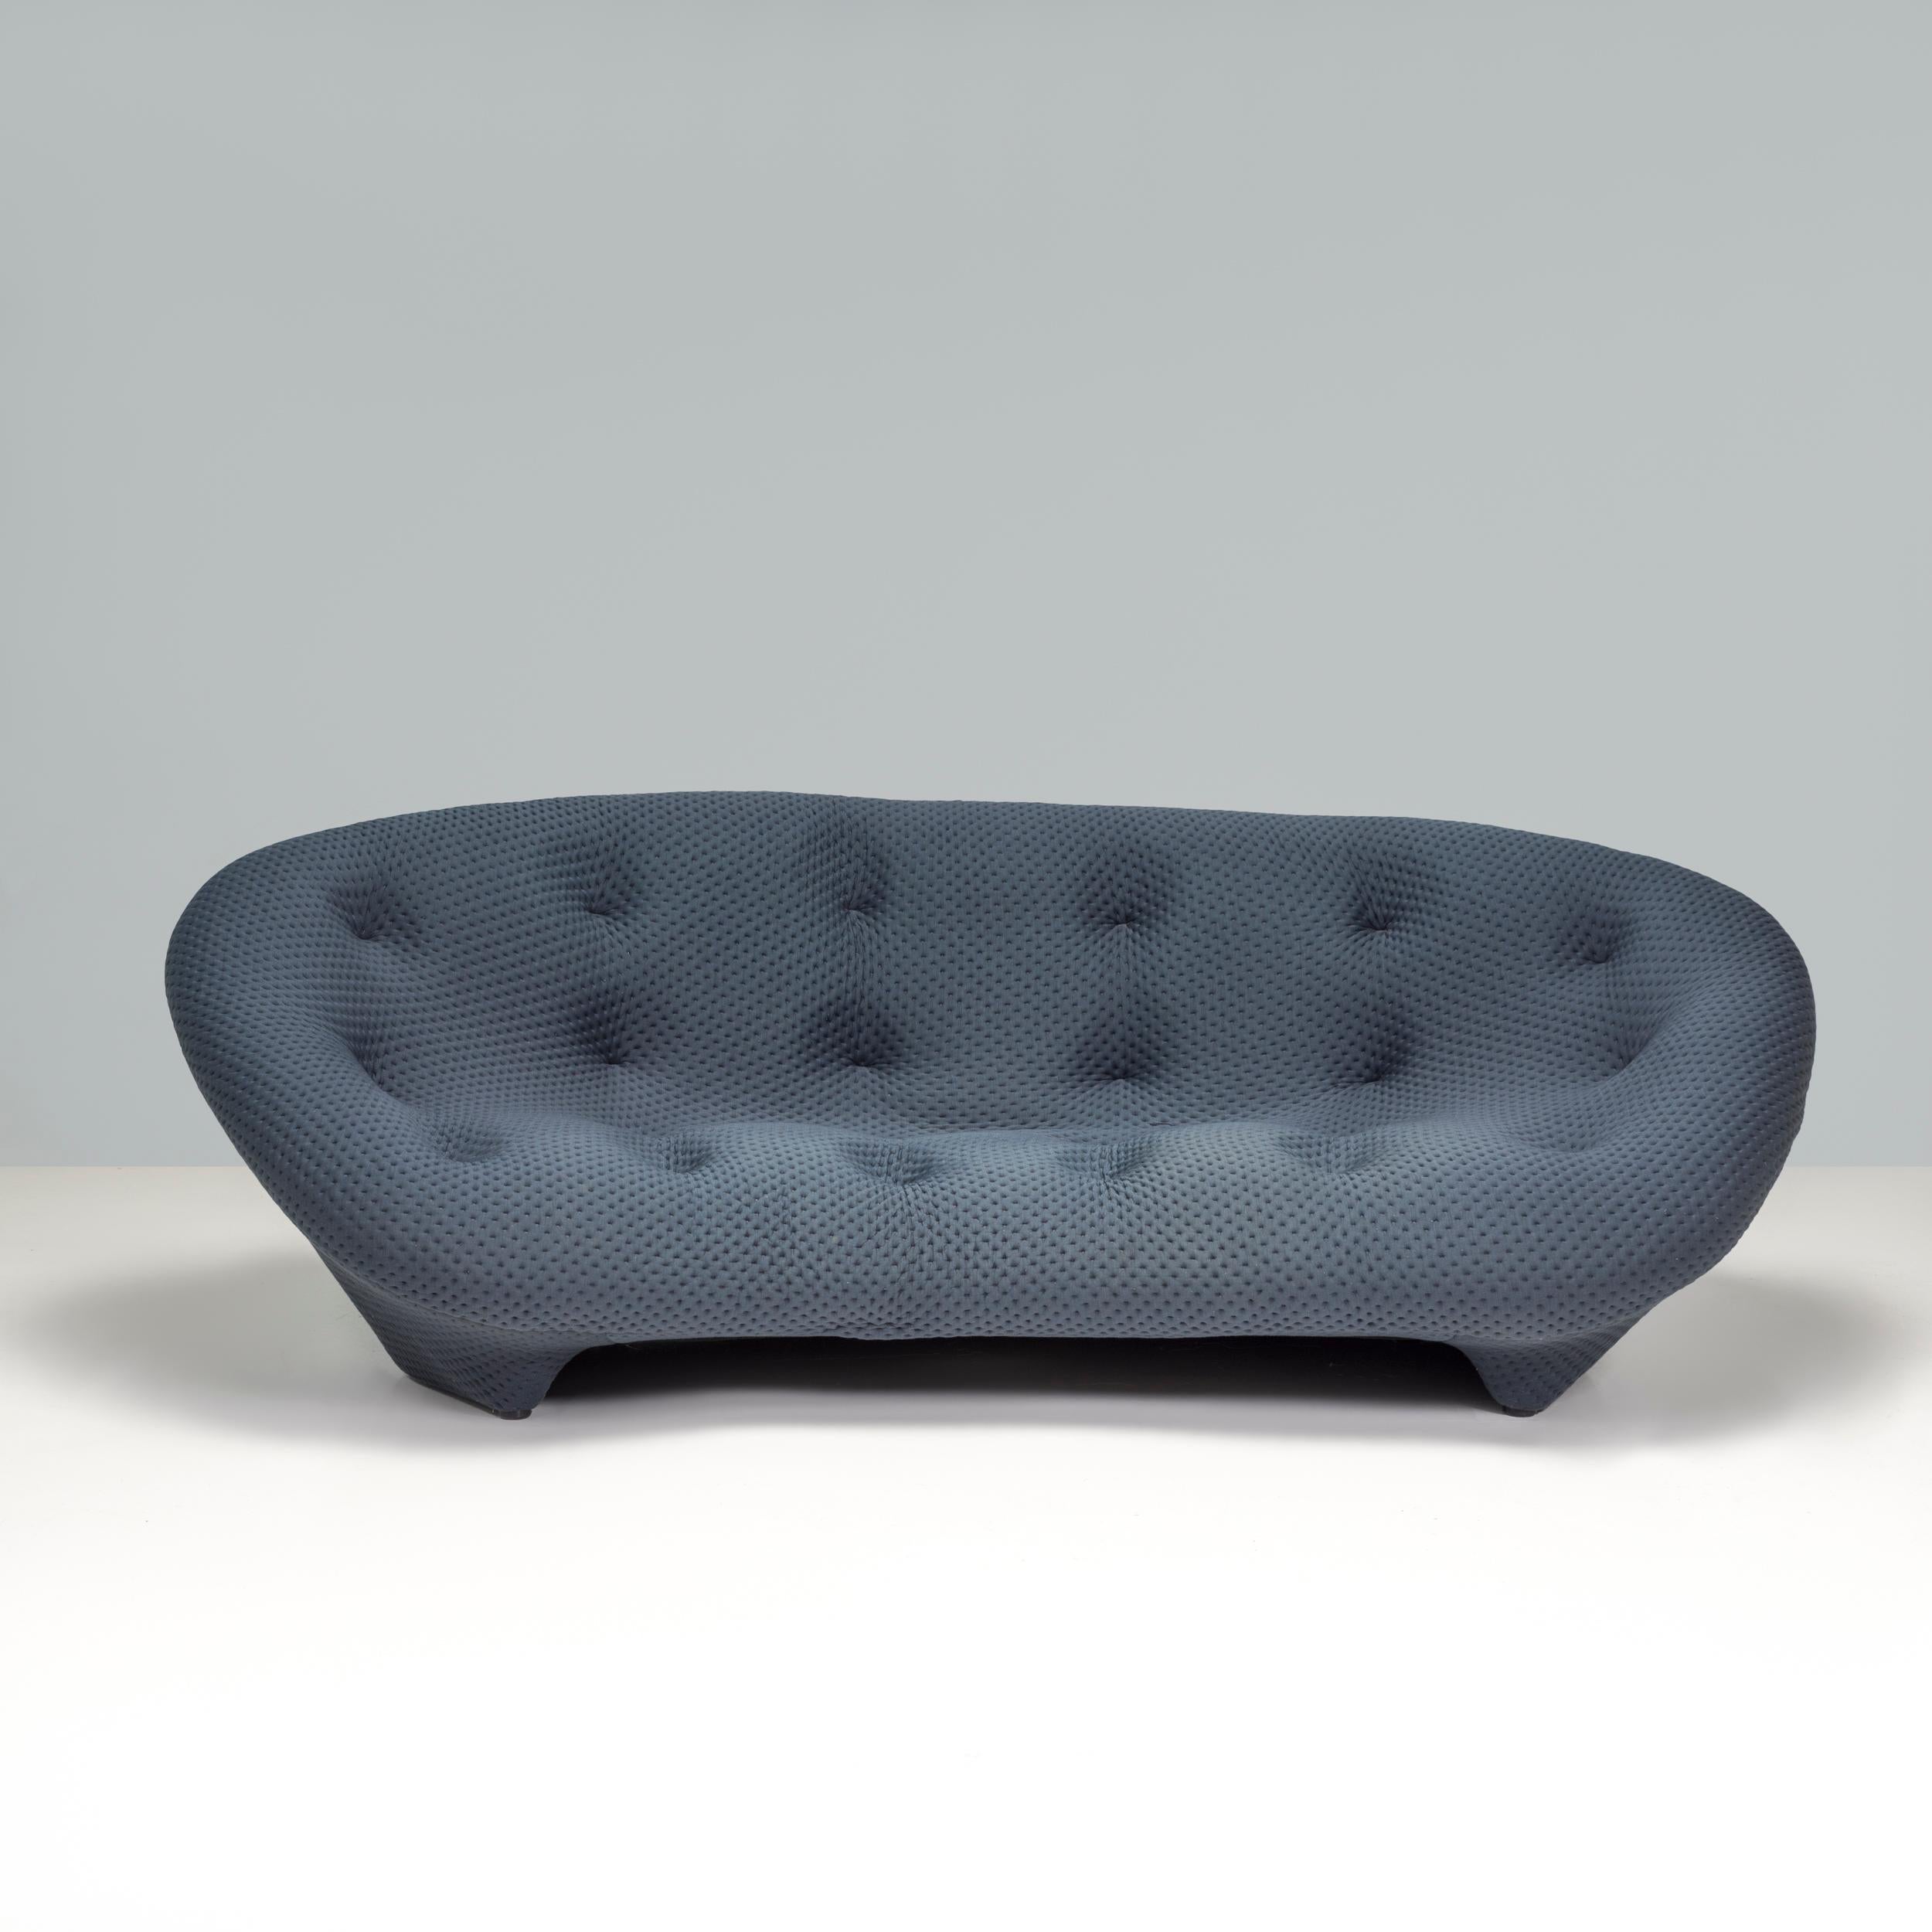 Originally designed by Erwan and Ronan Bouroullec for Ligne Roset in 2011, the Pluom sofa is a fantastic example of modern design. 

The organic shape is formed from tubular steel and wire mesh with layers of foam to ensure the ultimate comfort,